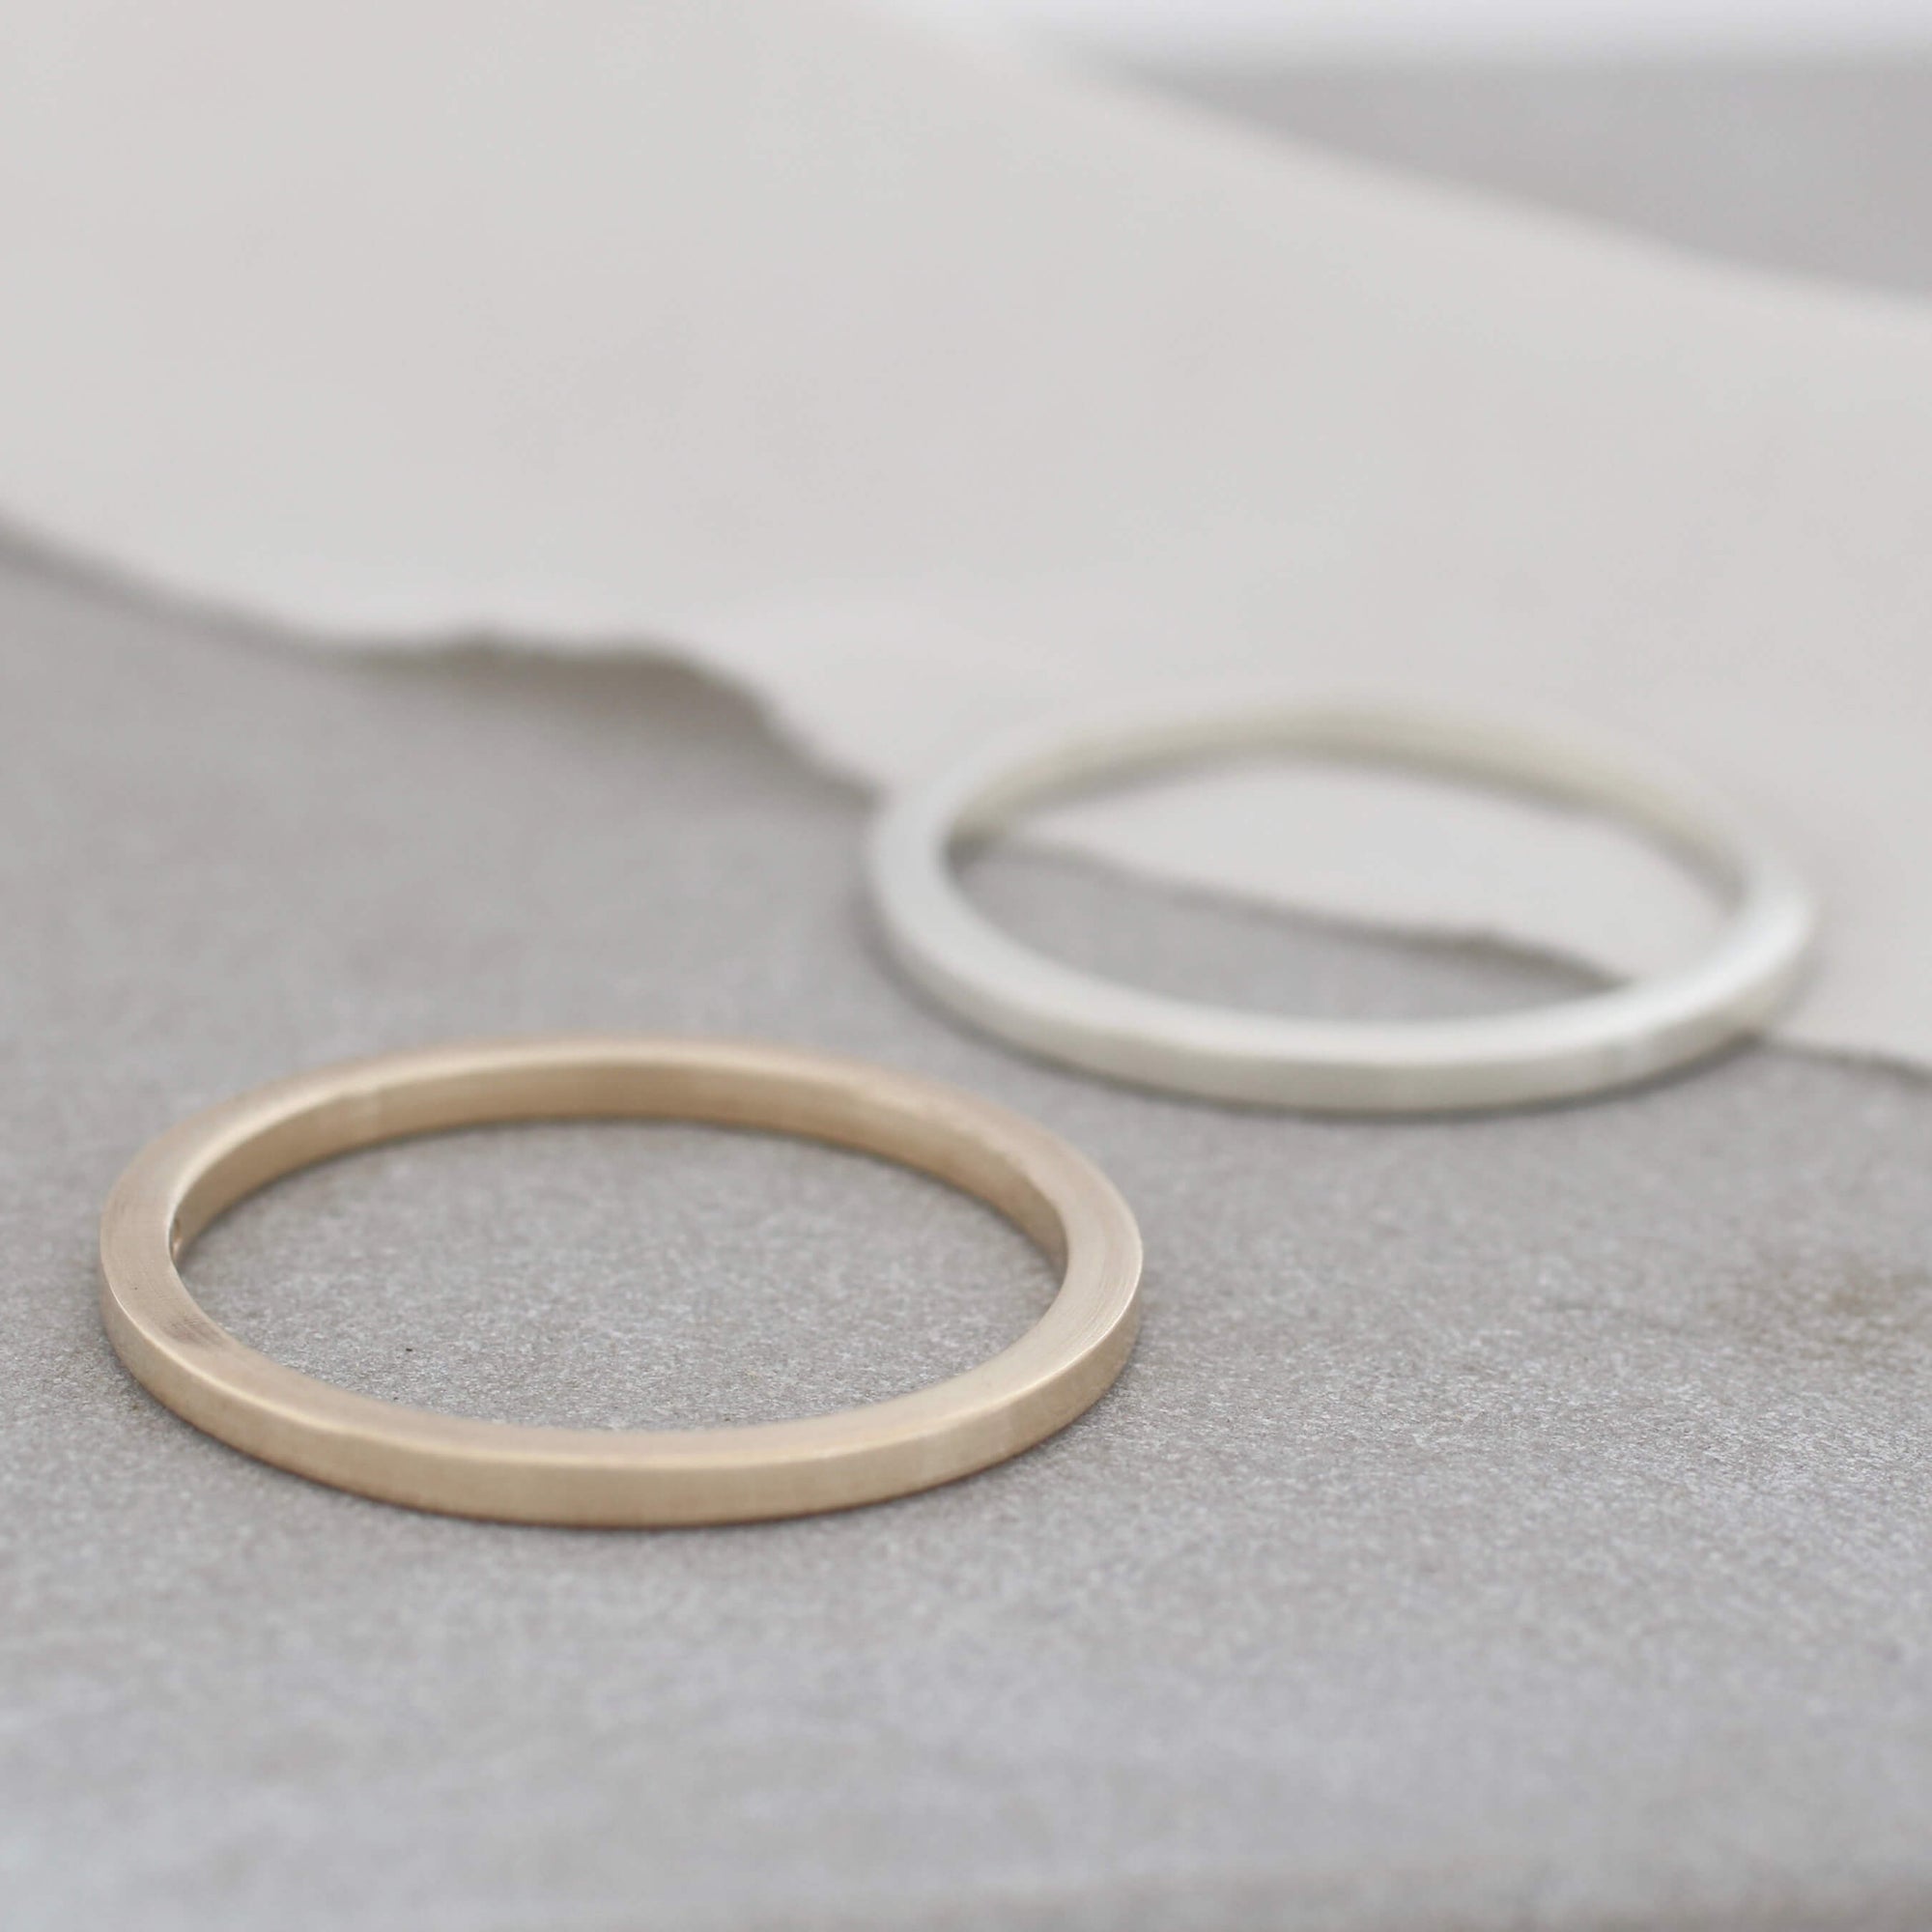 Plain Band Rings. 9ct Gold Stackable Ring